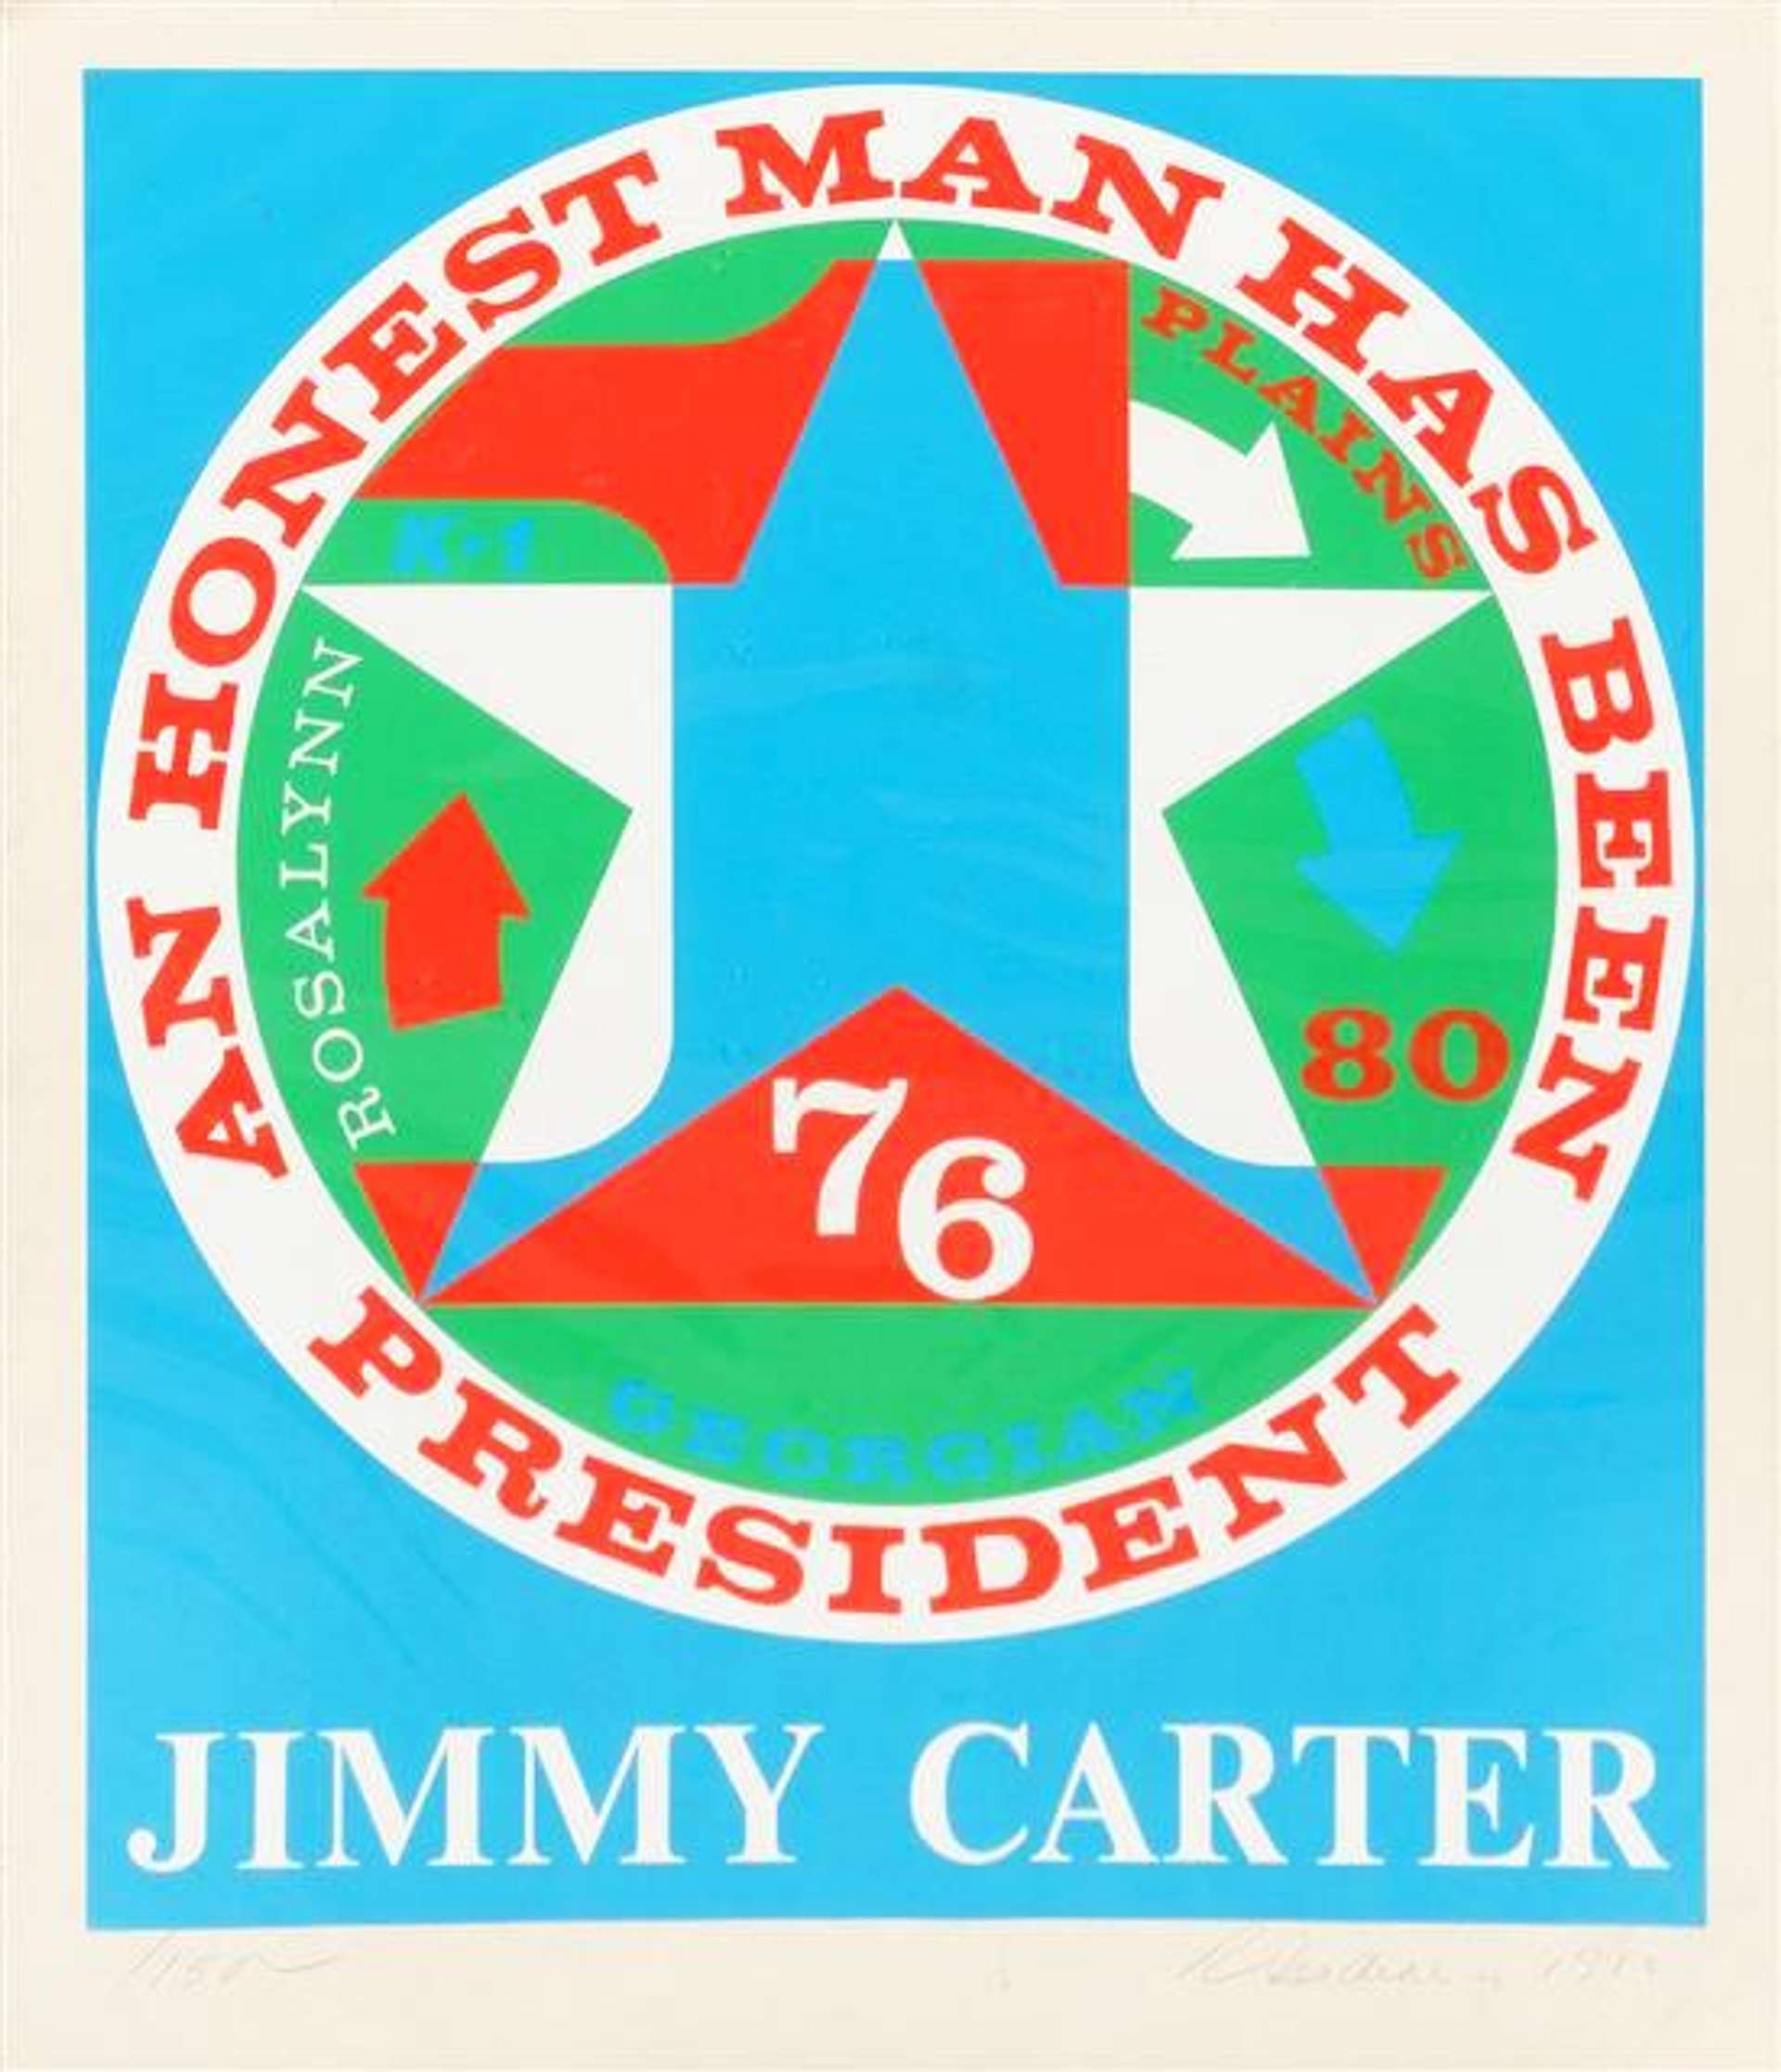 Jimmy Carter campaign ad with a star in the centre of the image surrounded by a wheel of text